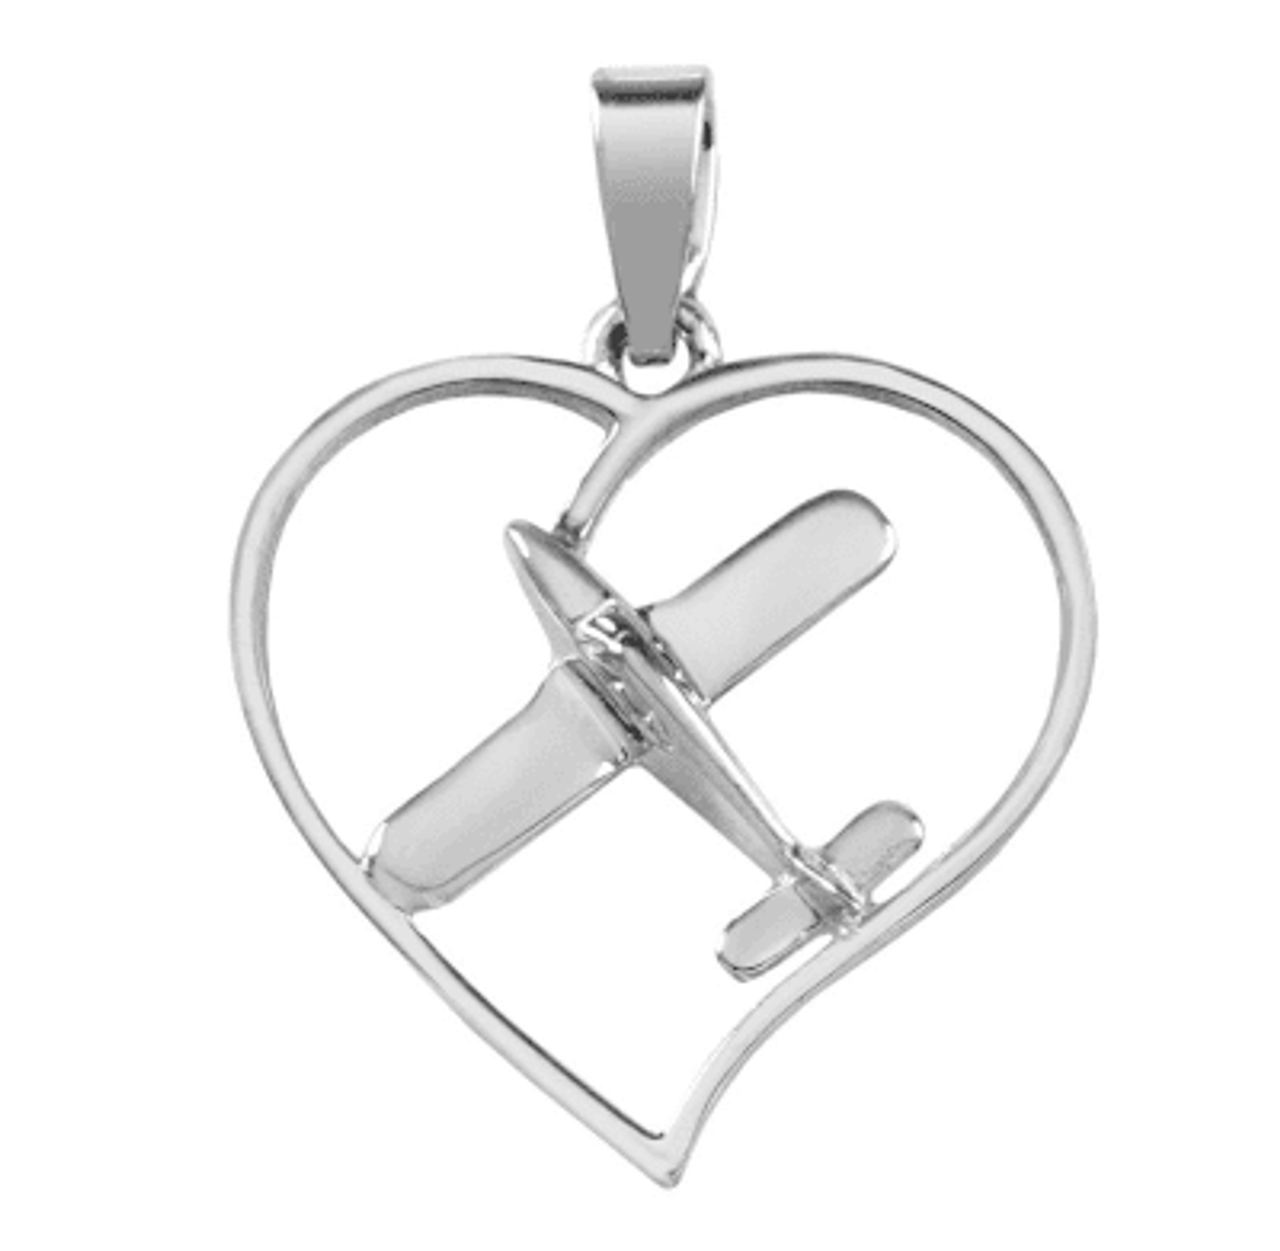 Airplane Necklace Sterling Silver Airplane Charm Necklace 